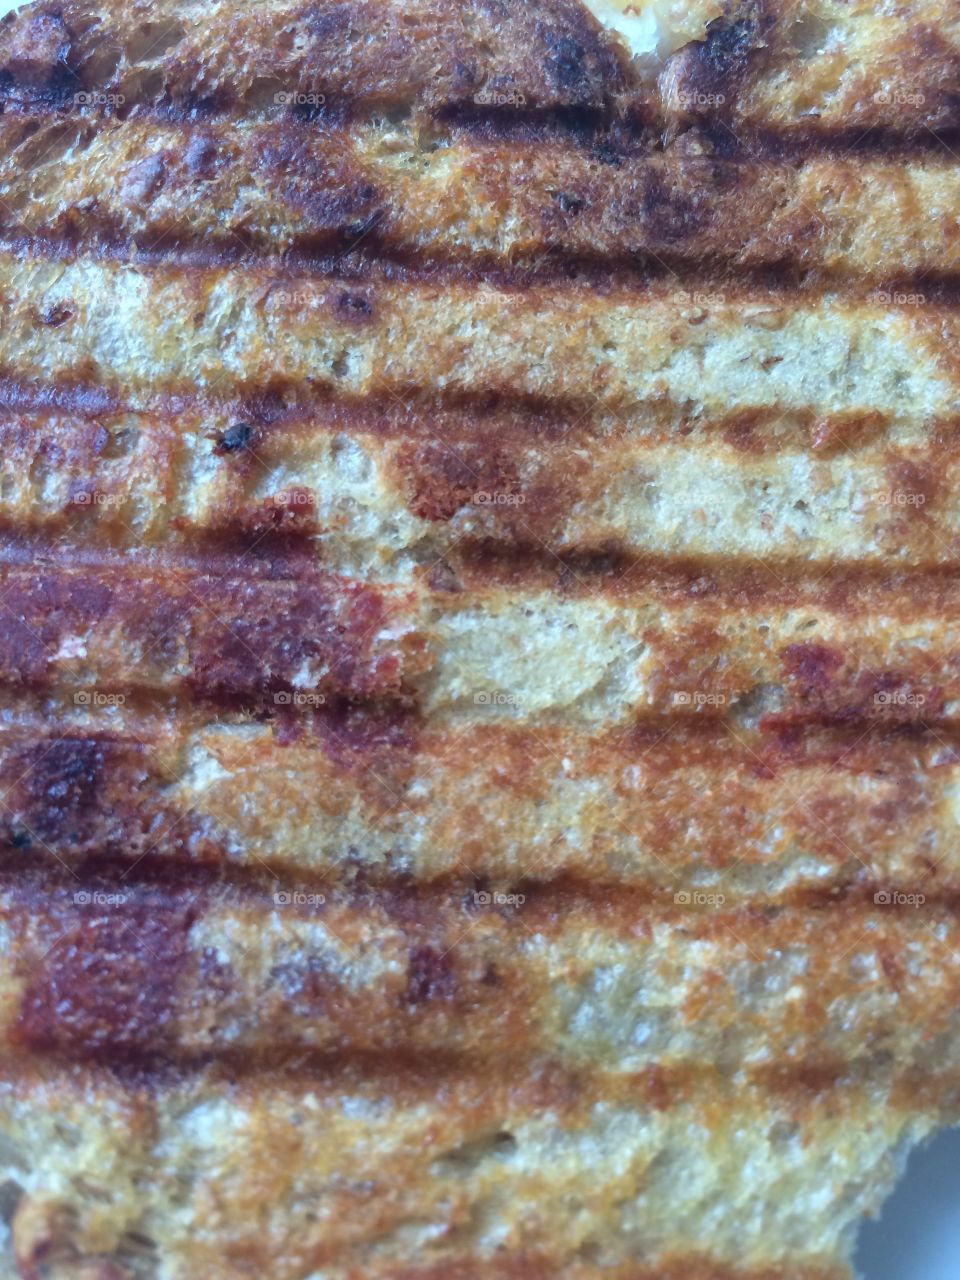 Panini toasted grilled sandwich 